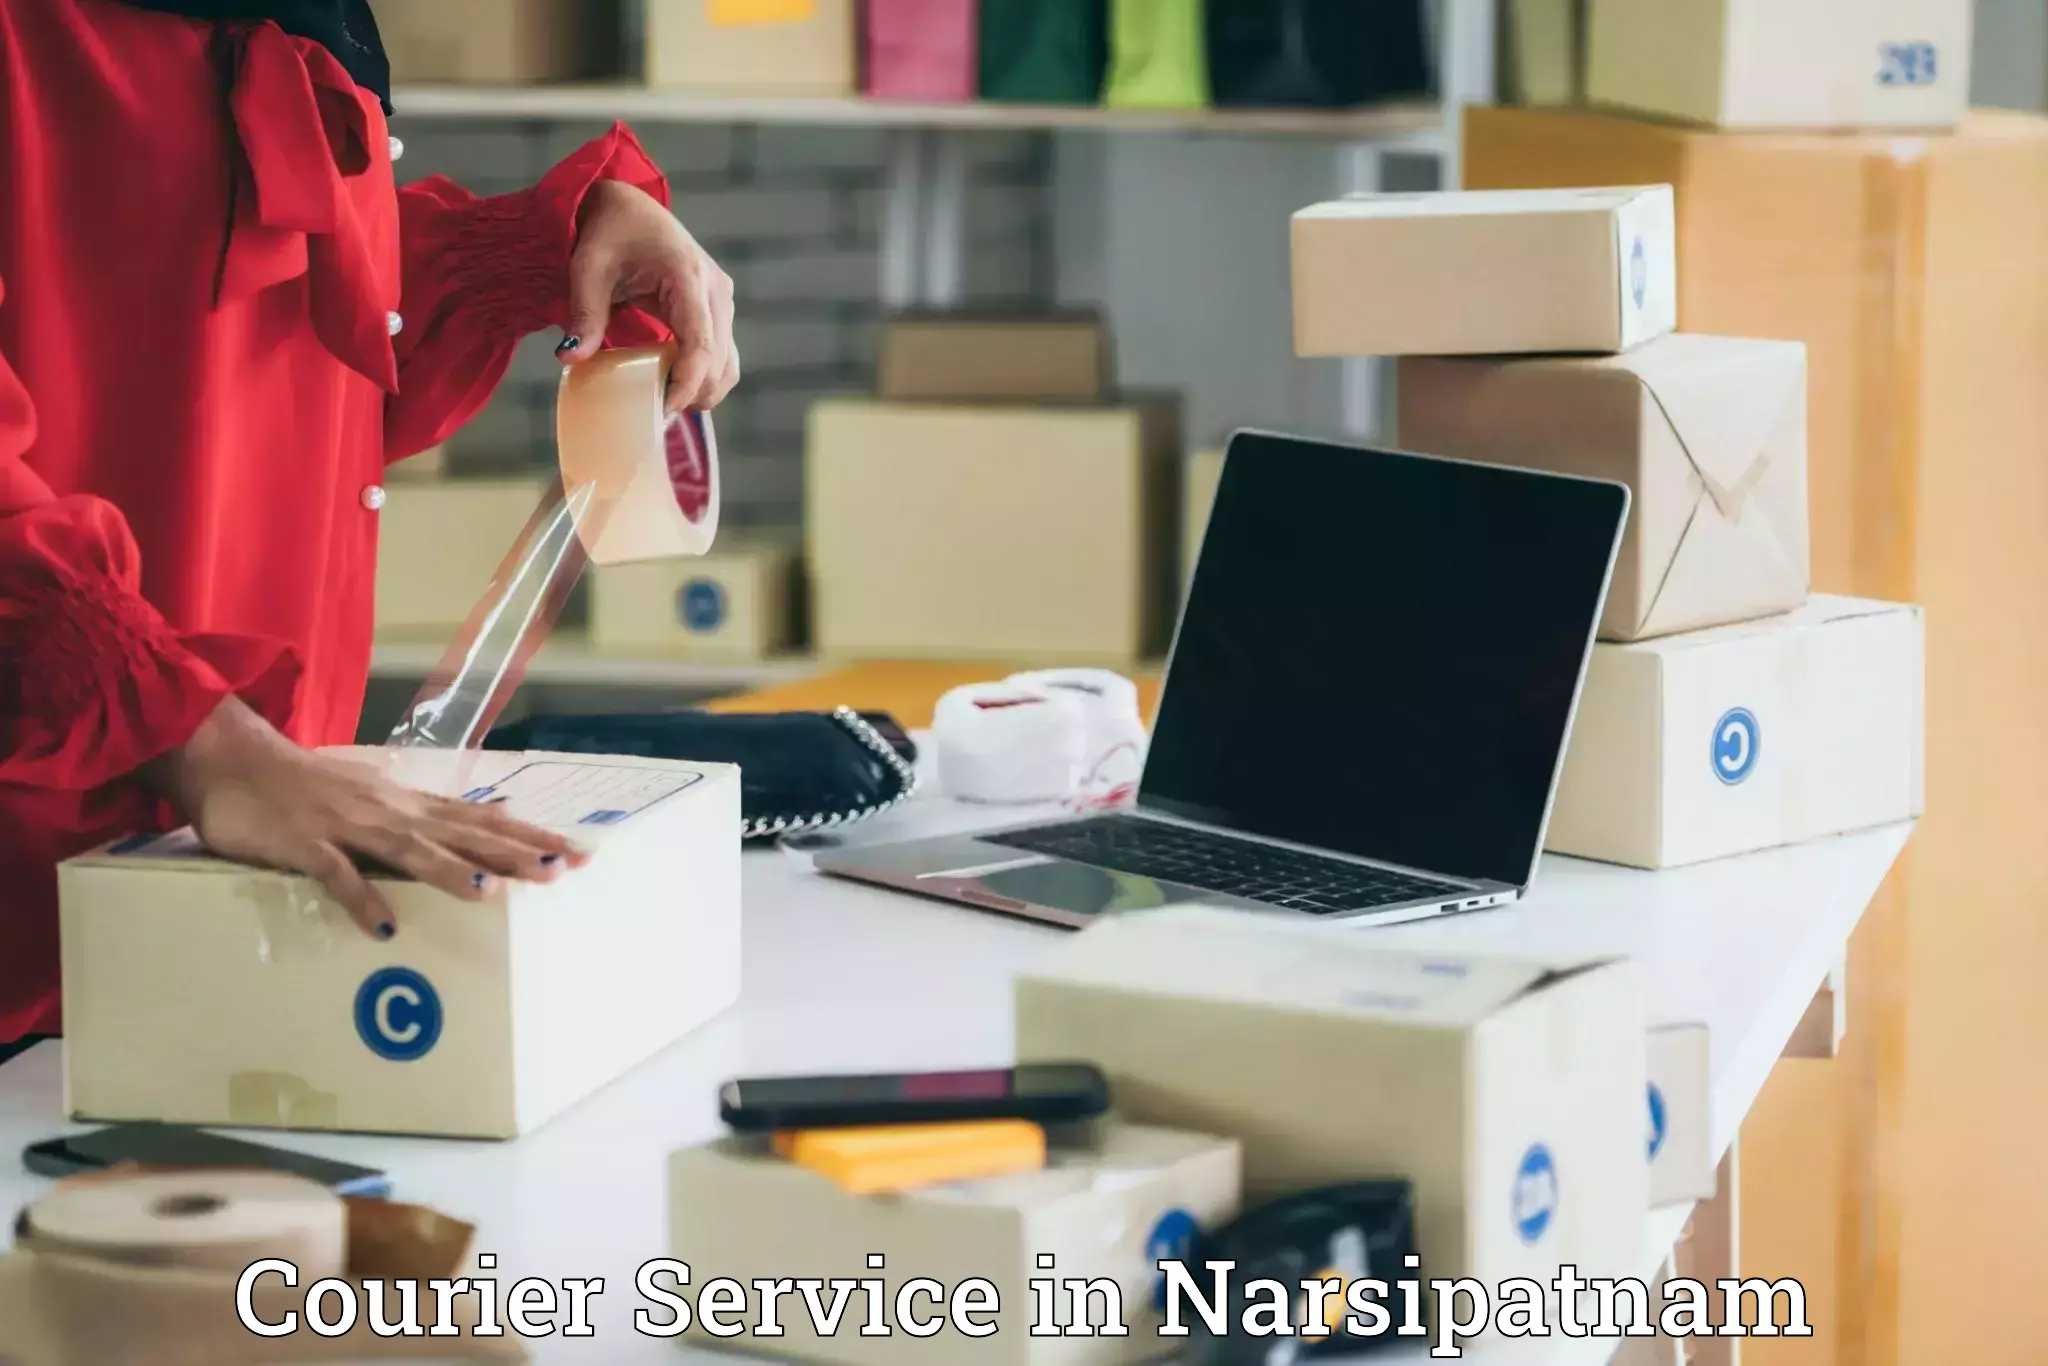 On-call courier service in Narsipatnam